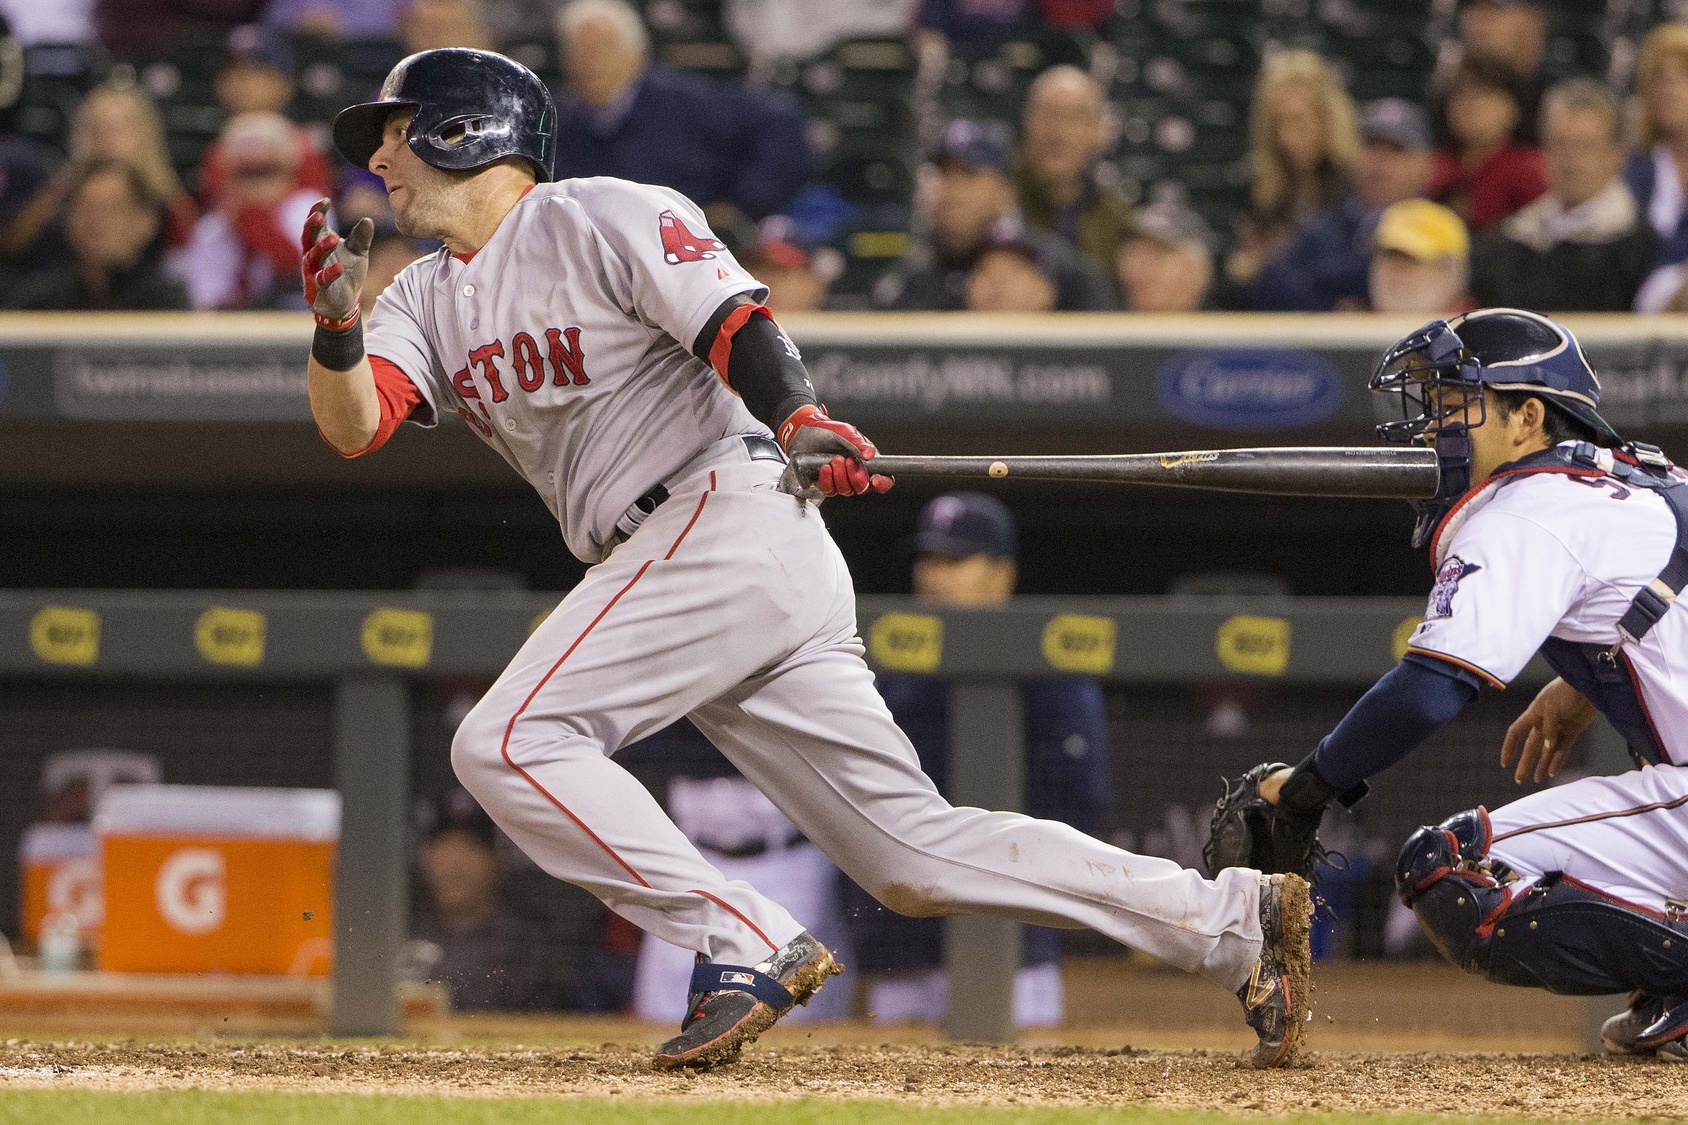 Dustin Pedroia is on a hot streak with an odd-looking bat designed to help  hitters